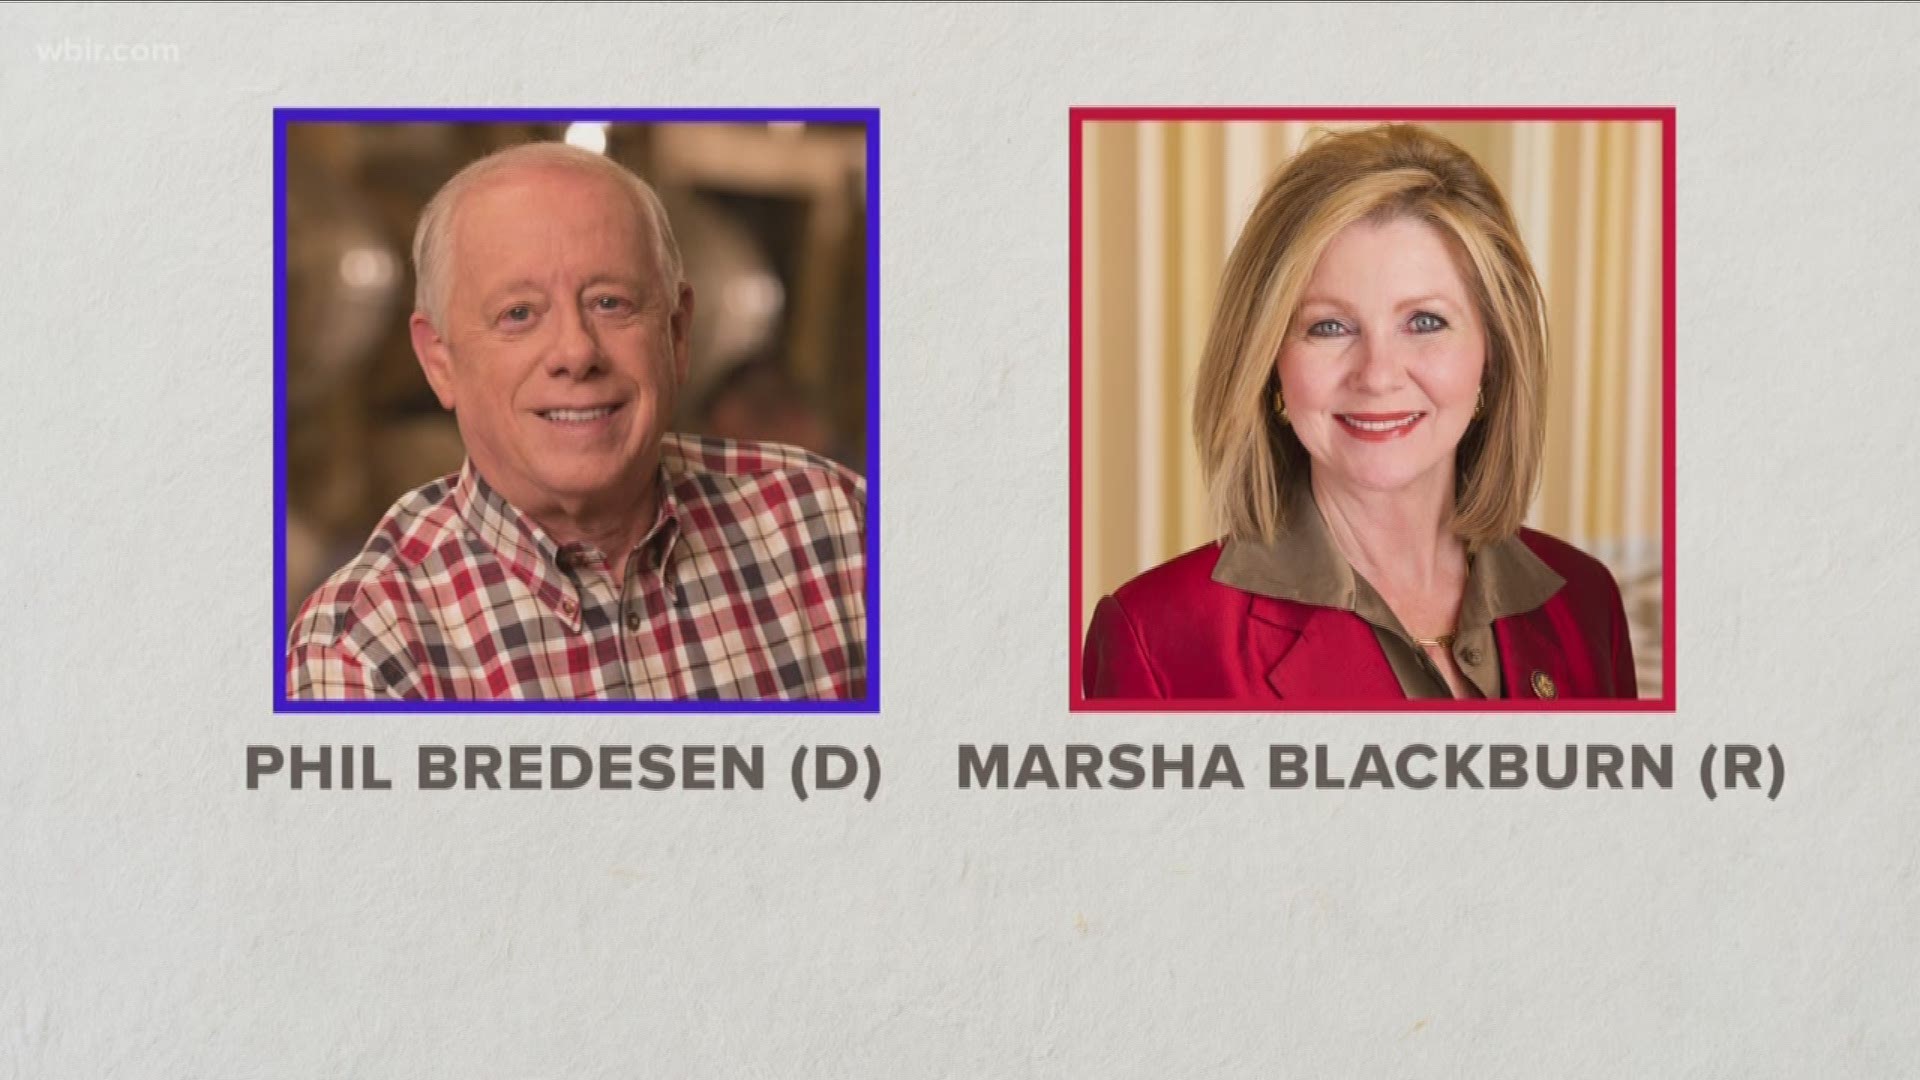 Republican Marsha Blackburn was in Knoxville for a campaign event where she visited a gun store. Her opponent, Democrat Phil Bredesen says he also strongly supports the 2nd amendment.